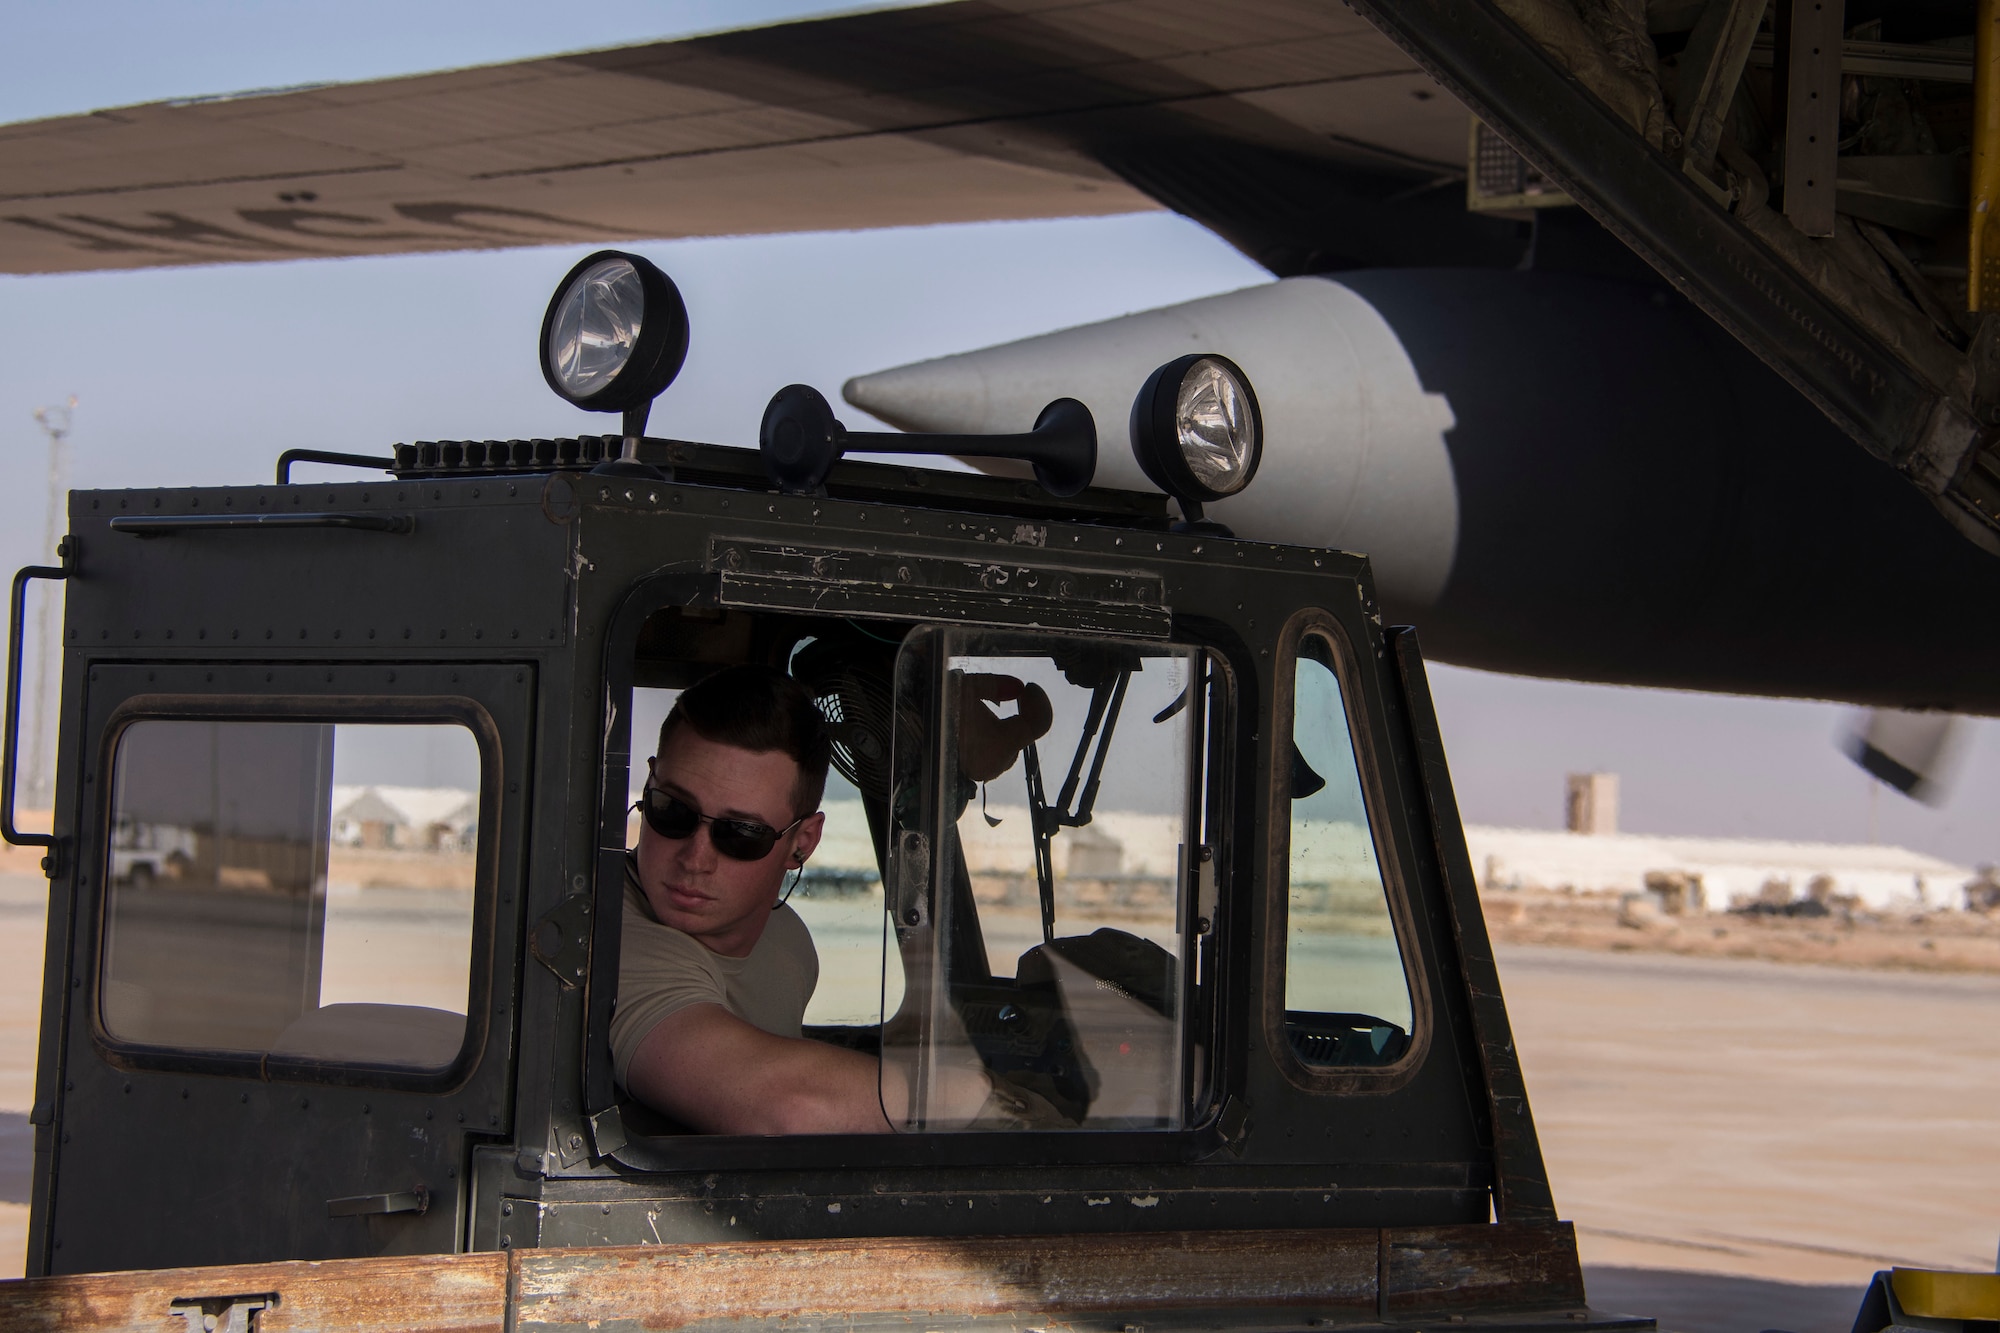 Senior Airman Christian Hall, an 870th Air Expeditionary Squadron aerial porter, watches as a pallet of supplies is offloaded from the K-loader he is driving at Al Asad Air Base, Iraq, Jan. 9, 2017. 870th AEAS aerial porters are required to be able to operate a variety of vehicles and machinery around the aerial port. (U.S. Air Force photo/Senior Airman Andrew Park)